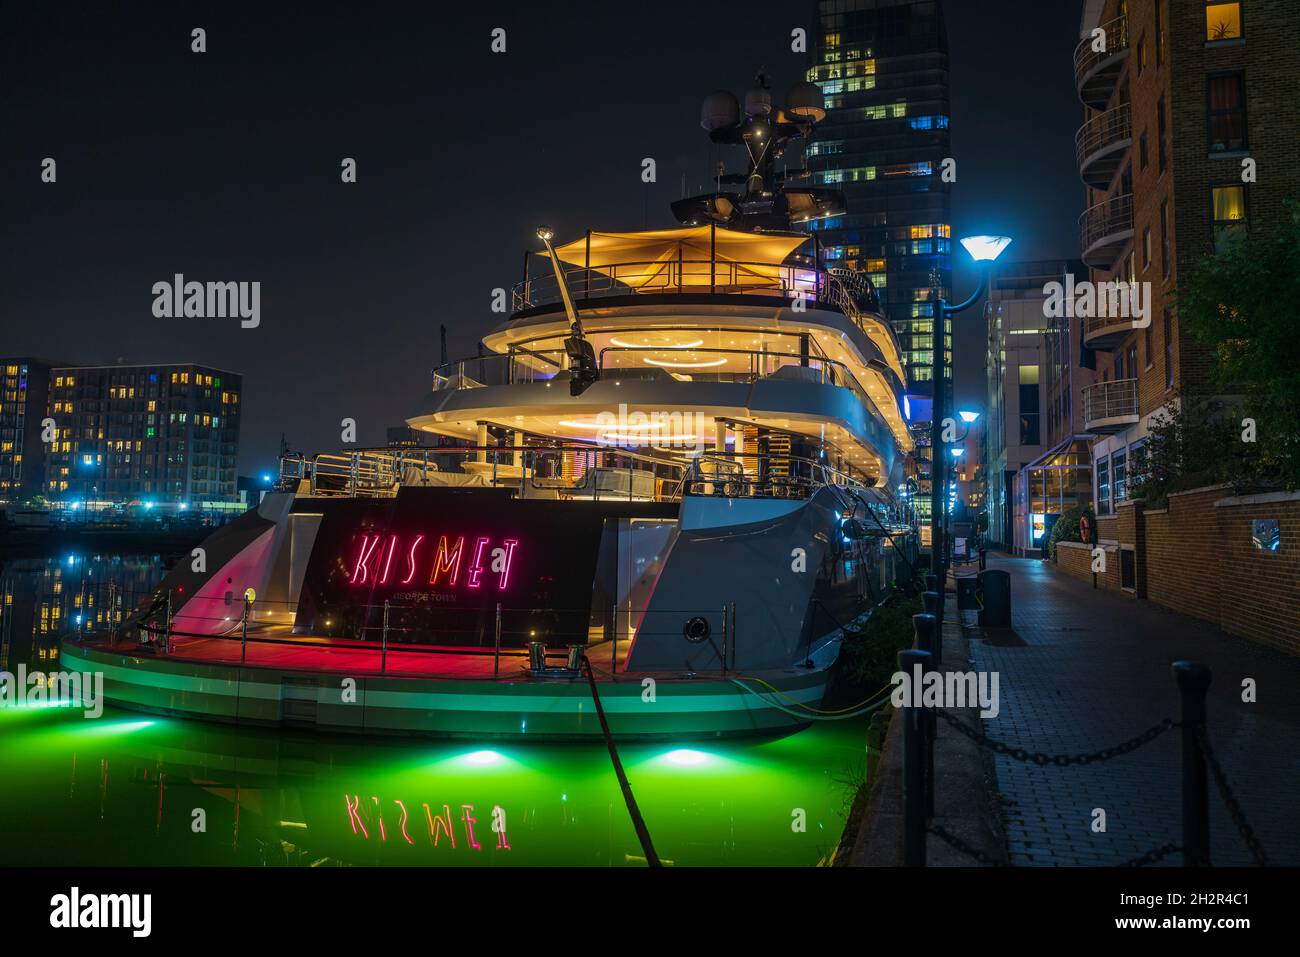 Superyacht Kismet visite South Dock, Canary Wharf, Londres, Angleterre, Royaume-Uni,ROYAUME-UNI Banque D'Images